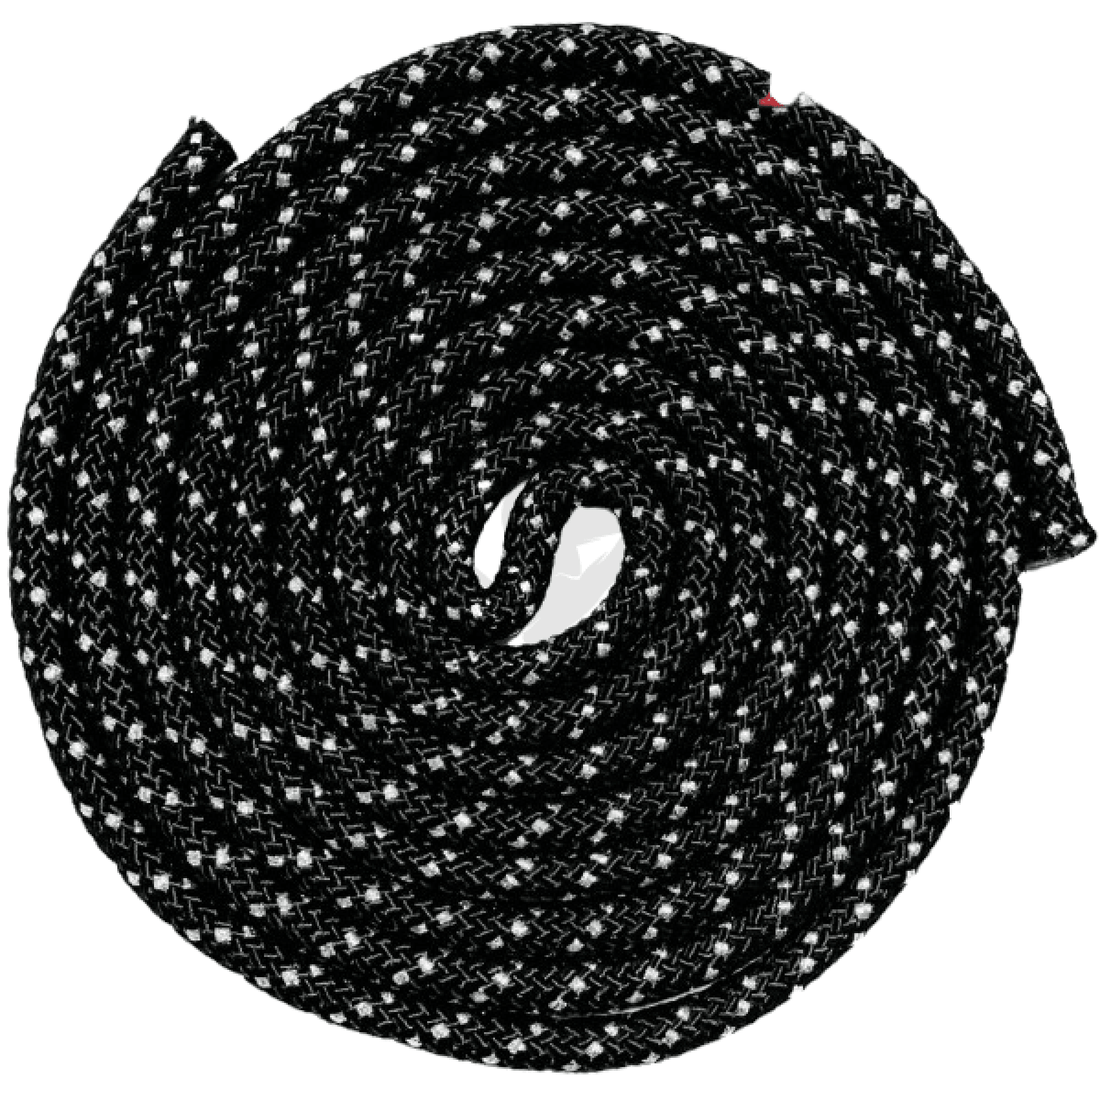 Tuloni Competition Rope 3M-Metal Black / Polyester 3M Ropes